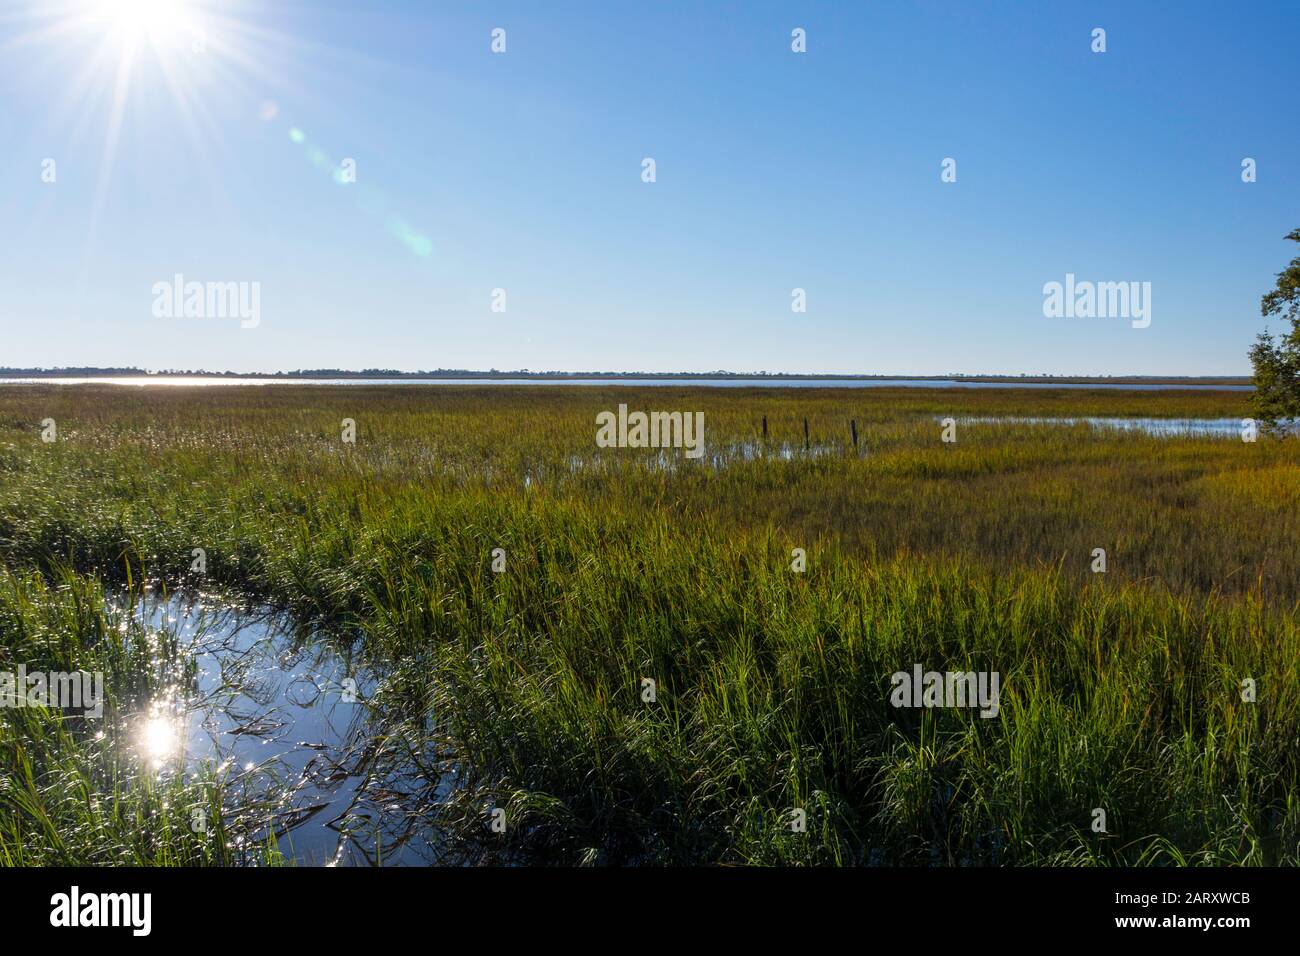 A beautiful landscape background of the lowcountry salt marsh off Jekyll Island, coastal Georgia, USA, a luxury slow travel destination in the South. Stock Photo